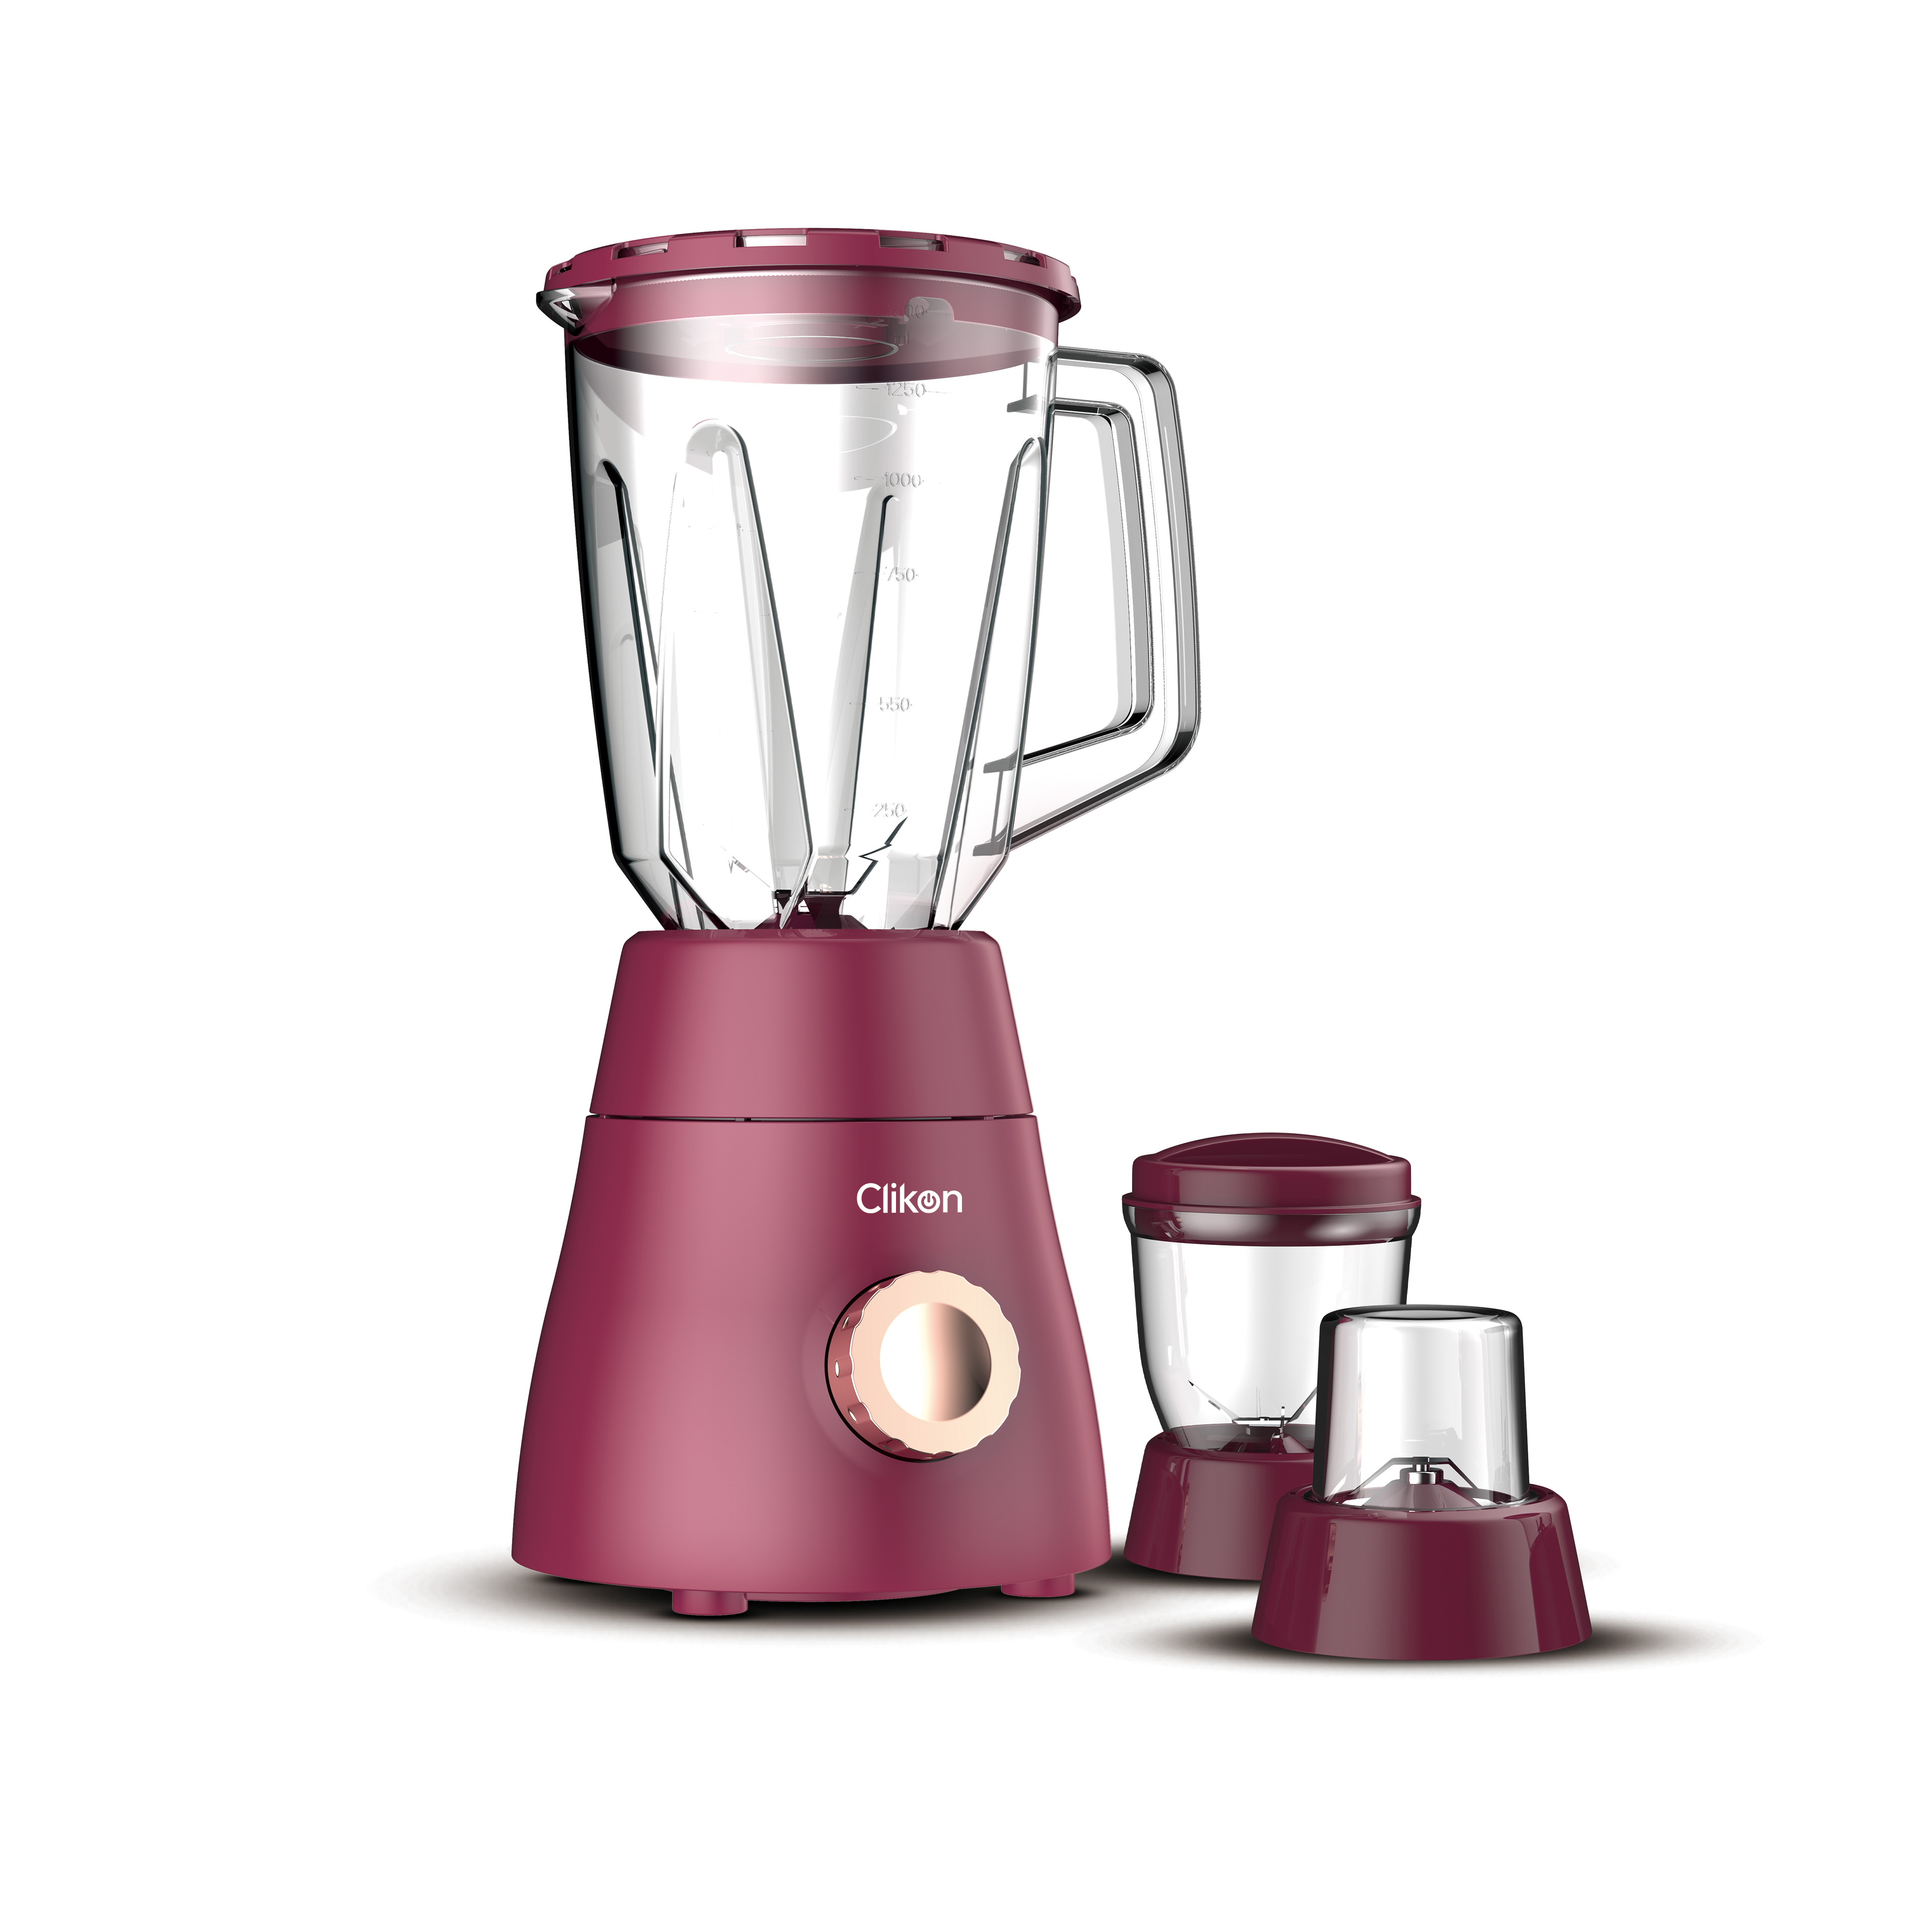 Clikon 3 In 1 Blender 2 Speed Settings With Pulse Control-Ck2680